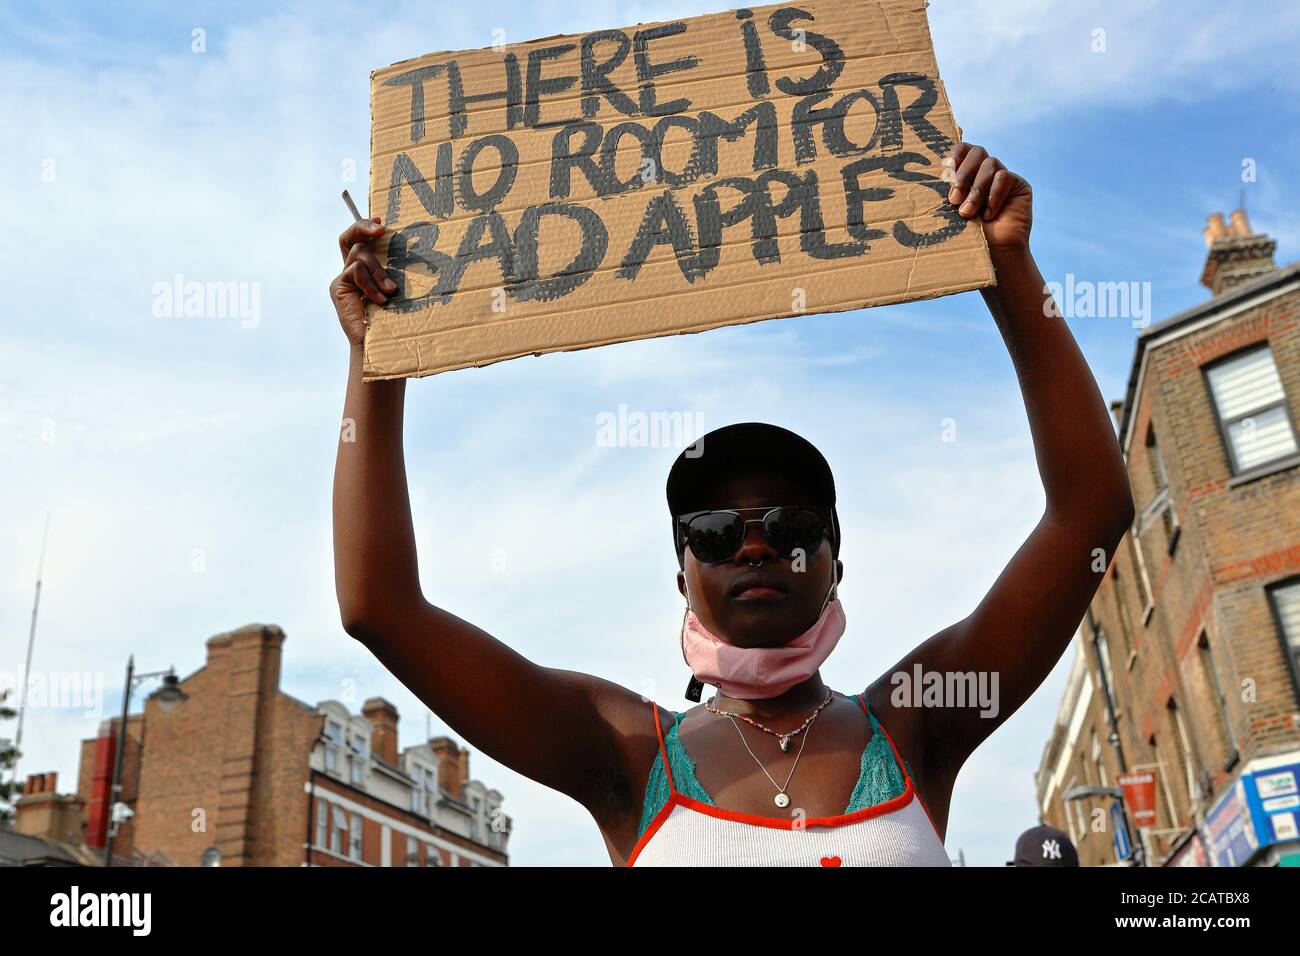 Tottenham - London (UK), August 8 2020:  A coalition of activist groups Rally outside Tottenham Police station police racism and violence. Stock Photo